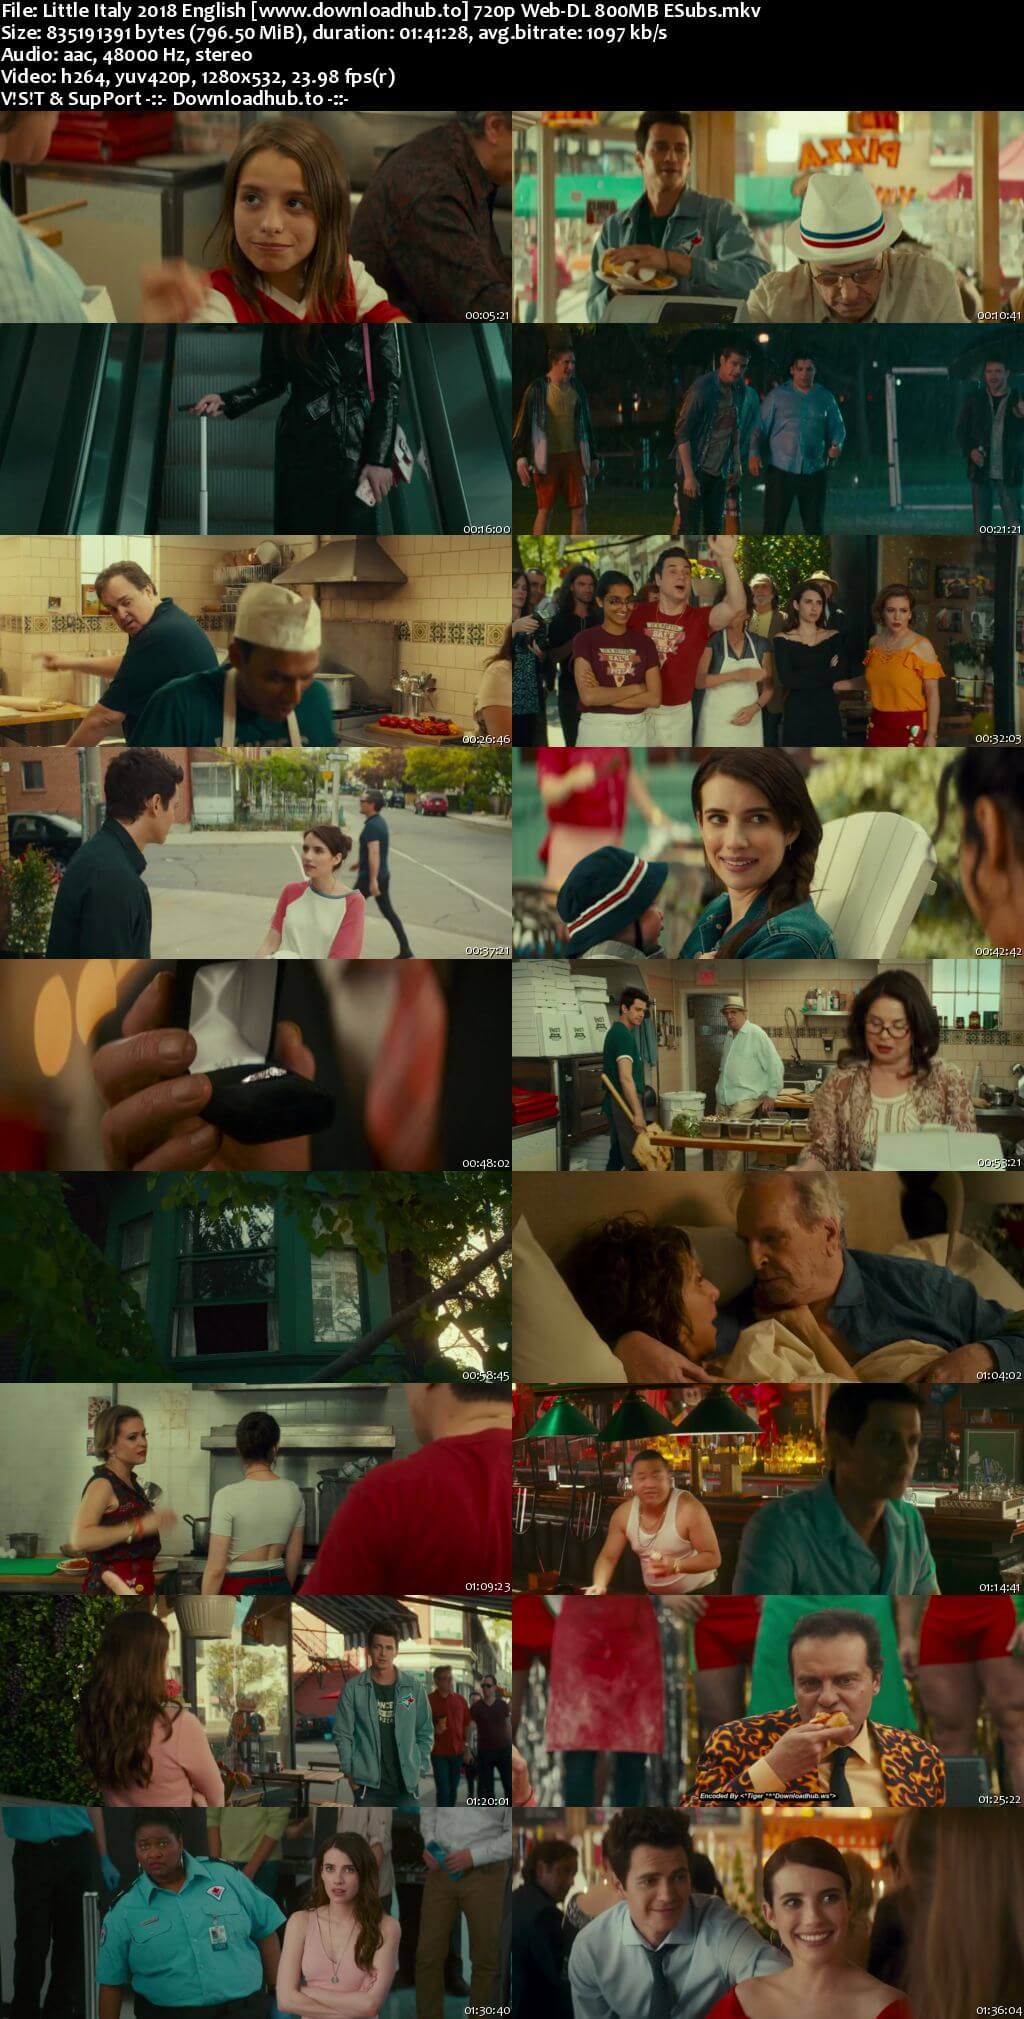 Little Italy 2018 English 720p Web-DL 800MB ESubs